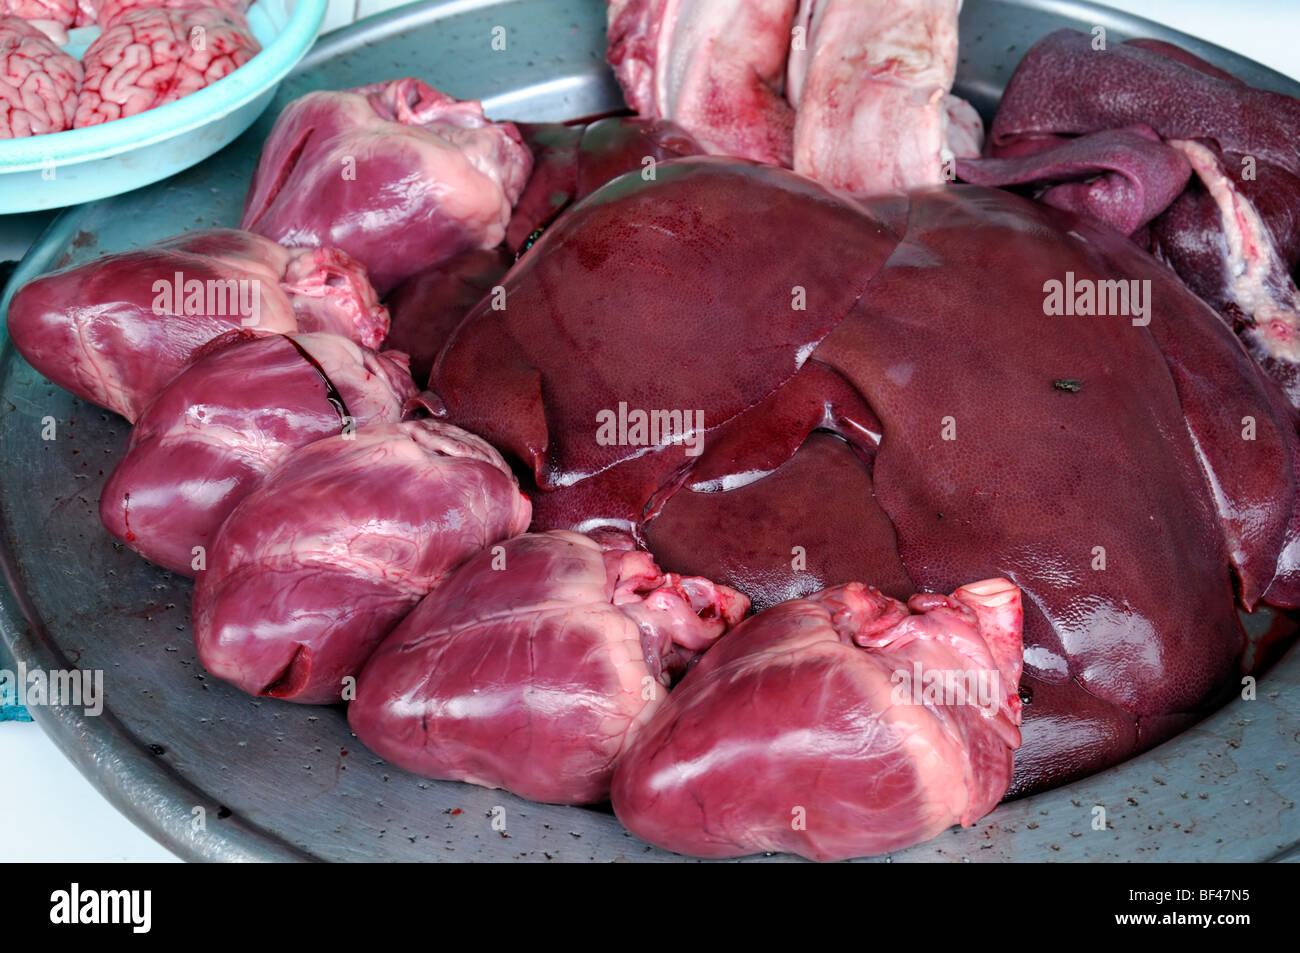 meat products offal organ organs heart liver produce food on sale market ho chi minh vietnam asia unsanitary Ben Thanh Market Stock Photo